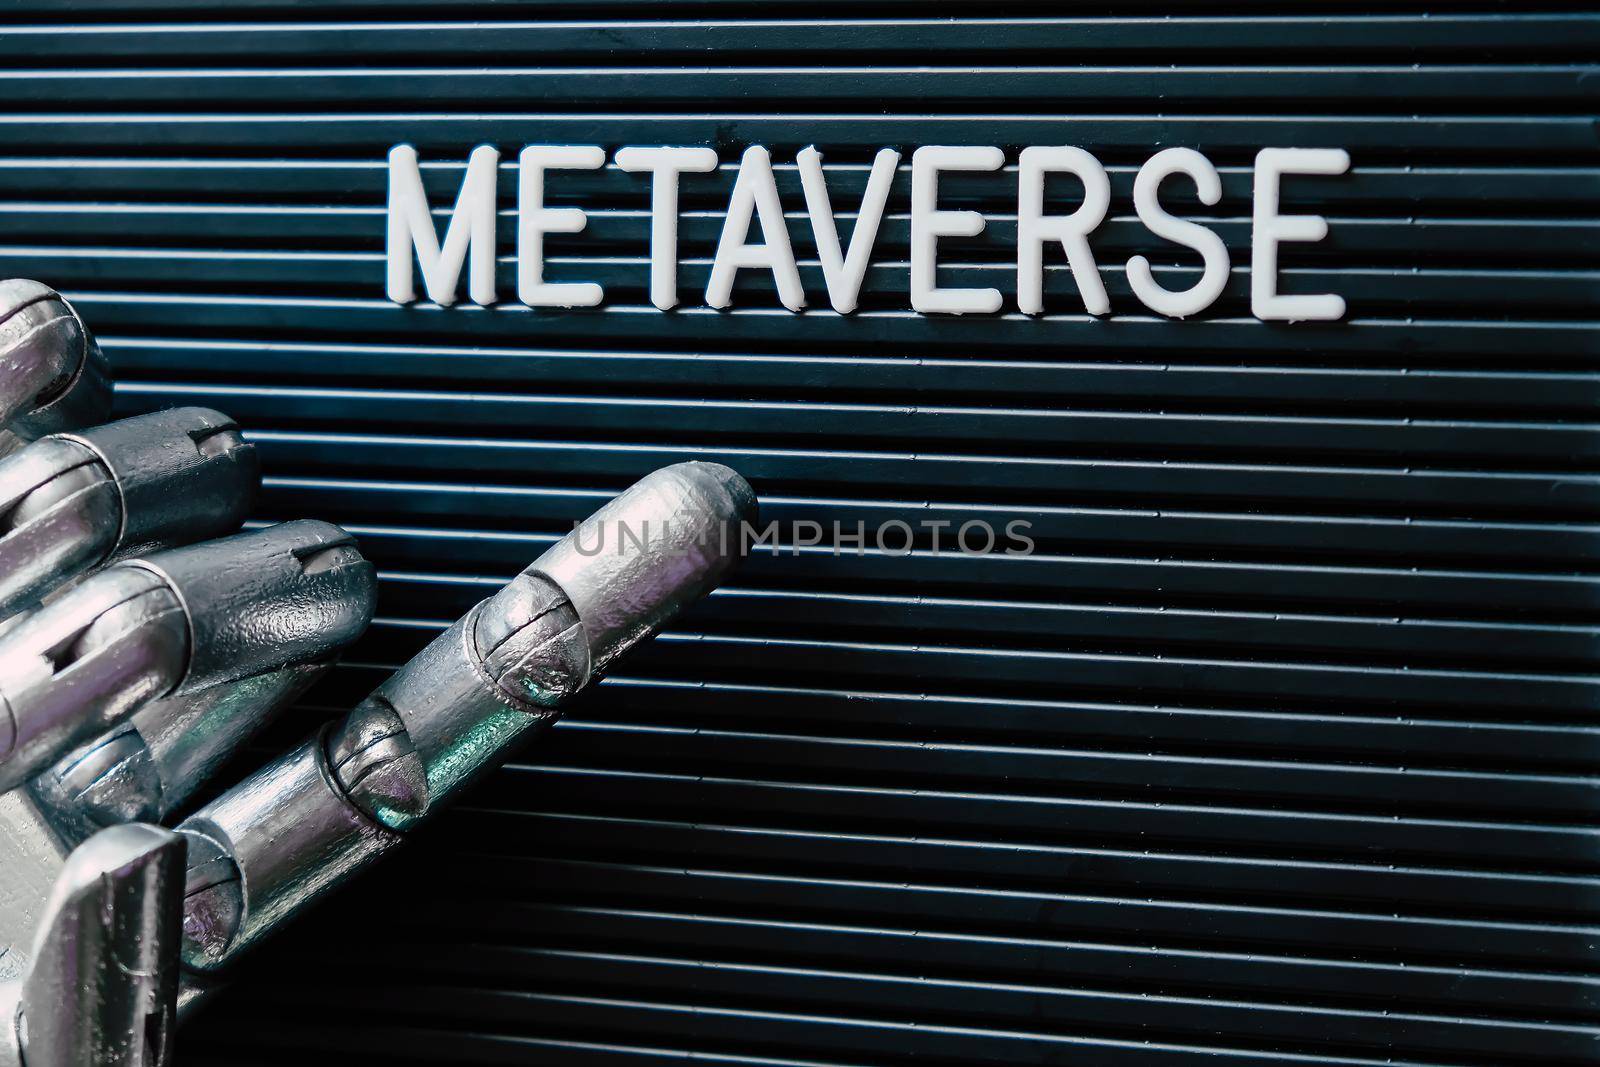 Concept image of Metaverse, Metaverse letters